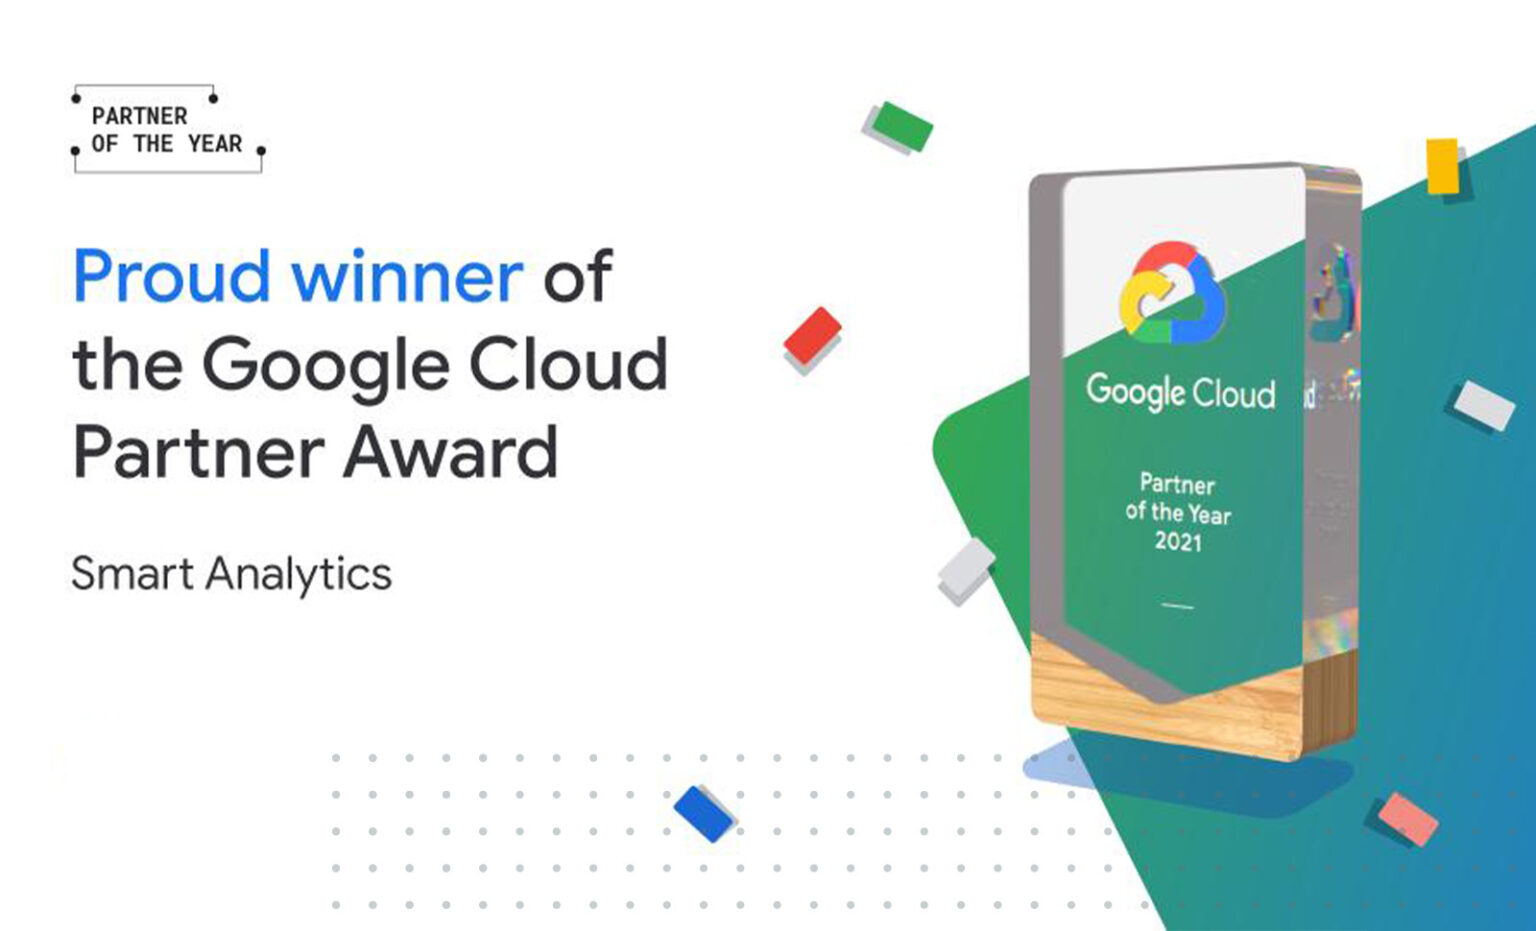 Collibra wins the Google Cloud Award for the Smart Analytics category